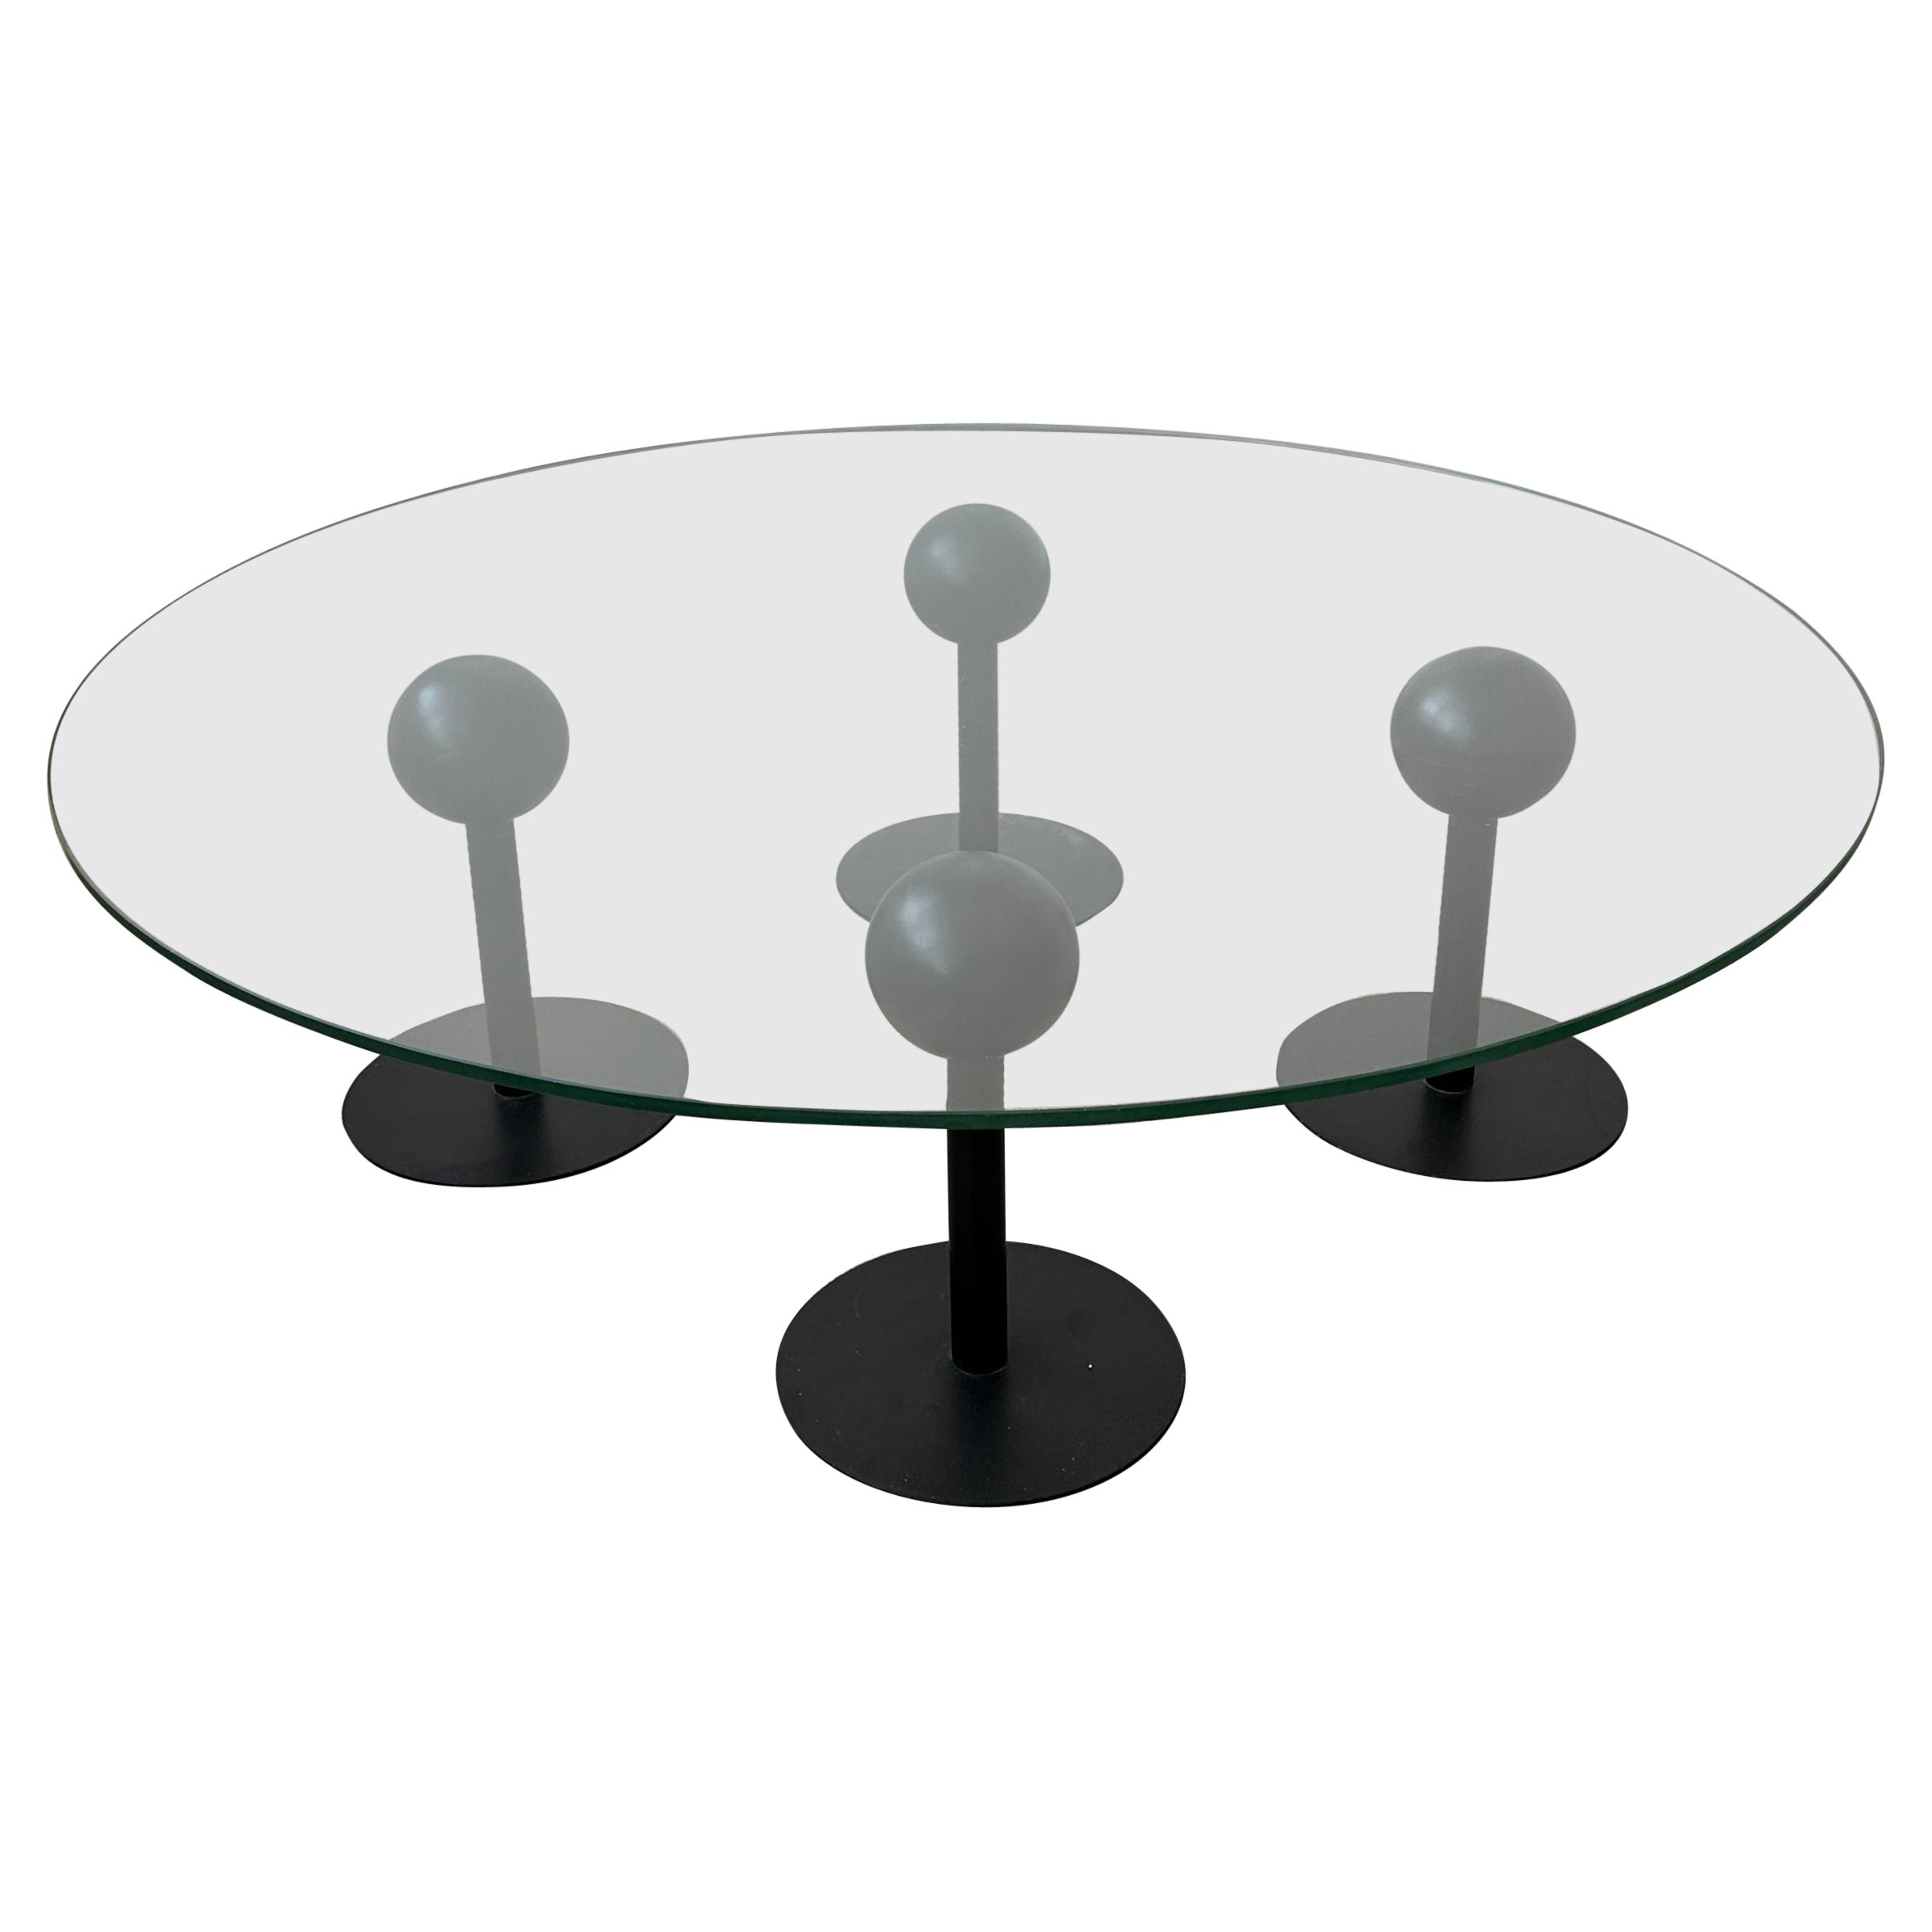 Philippe Starck "Pepper Young" Coffee Table